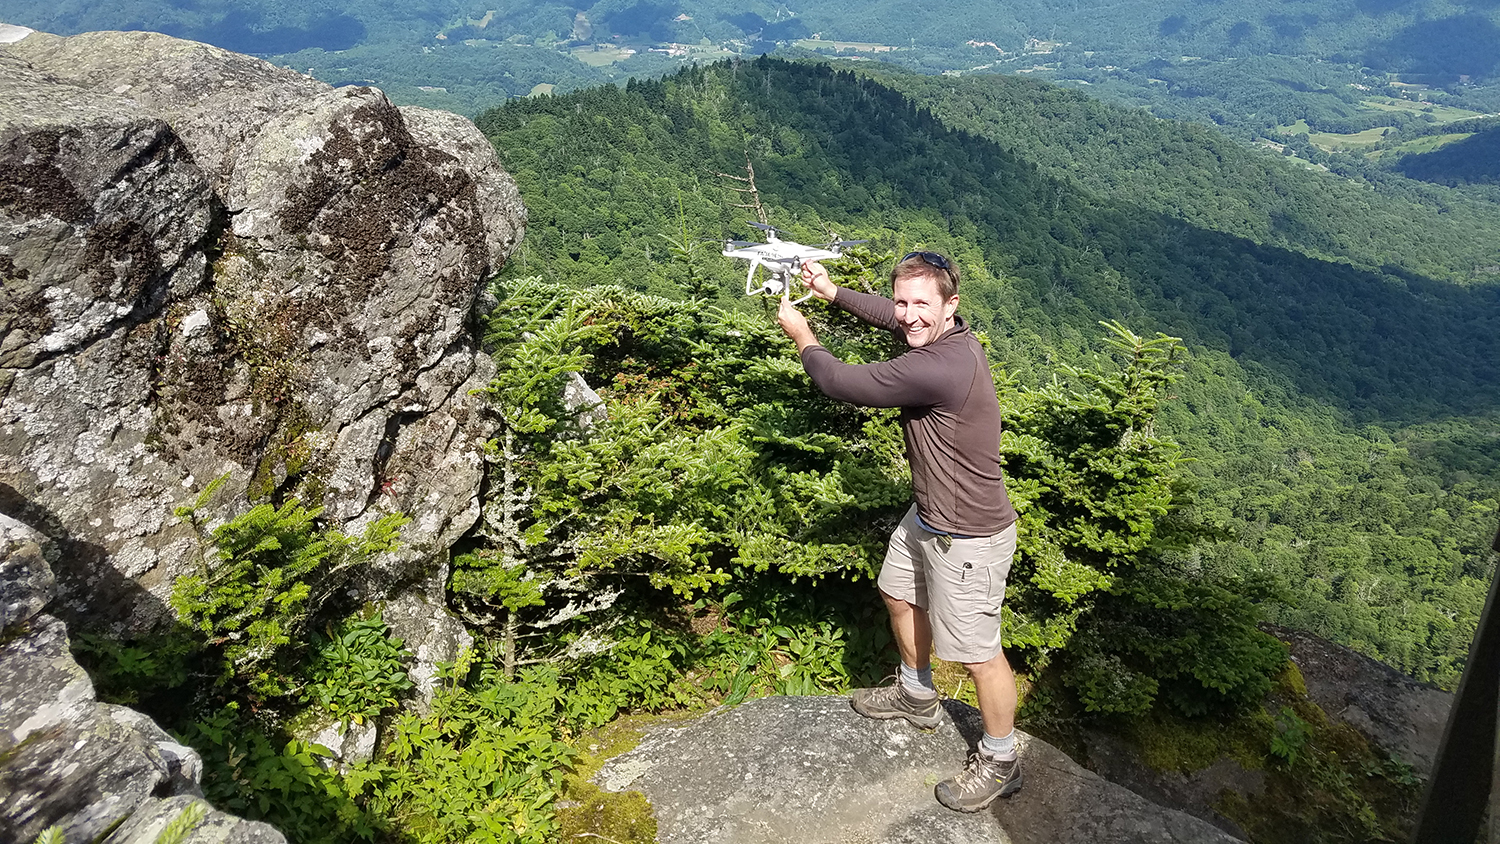 NC State University doctoral researcher Will Reckling prepares to launch a drone on Roan Mountain, NC, to map the area for endangered high-elevation plants - Keeping Track of Rare Mountaintop Plants with Drones - Center for Geospatial Analytics at NC State University